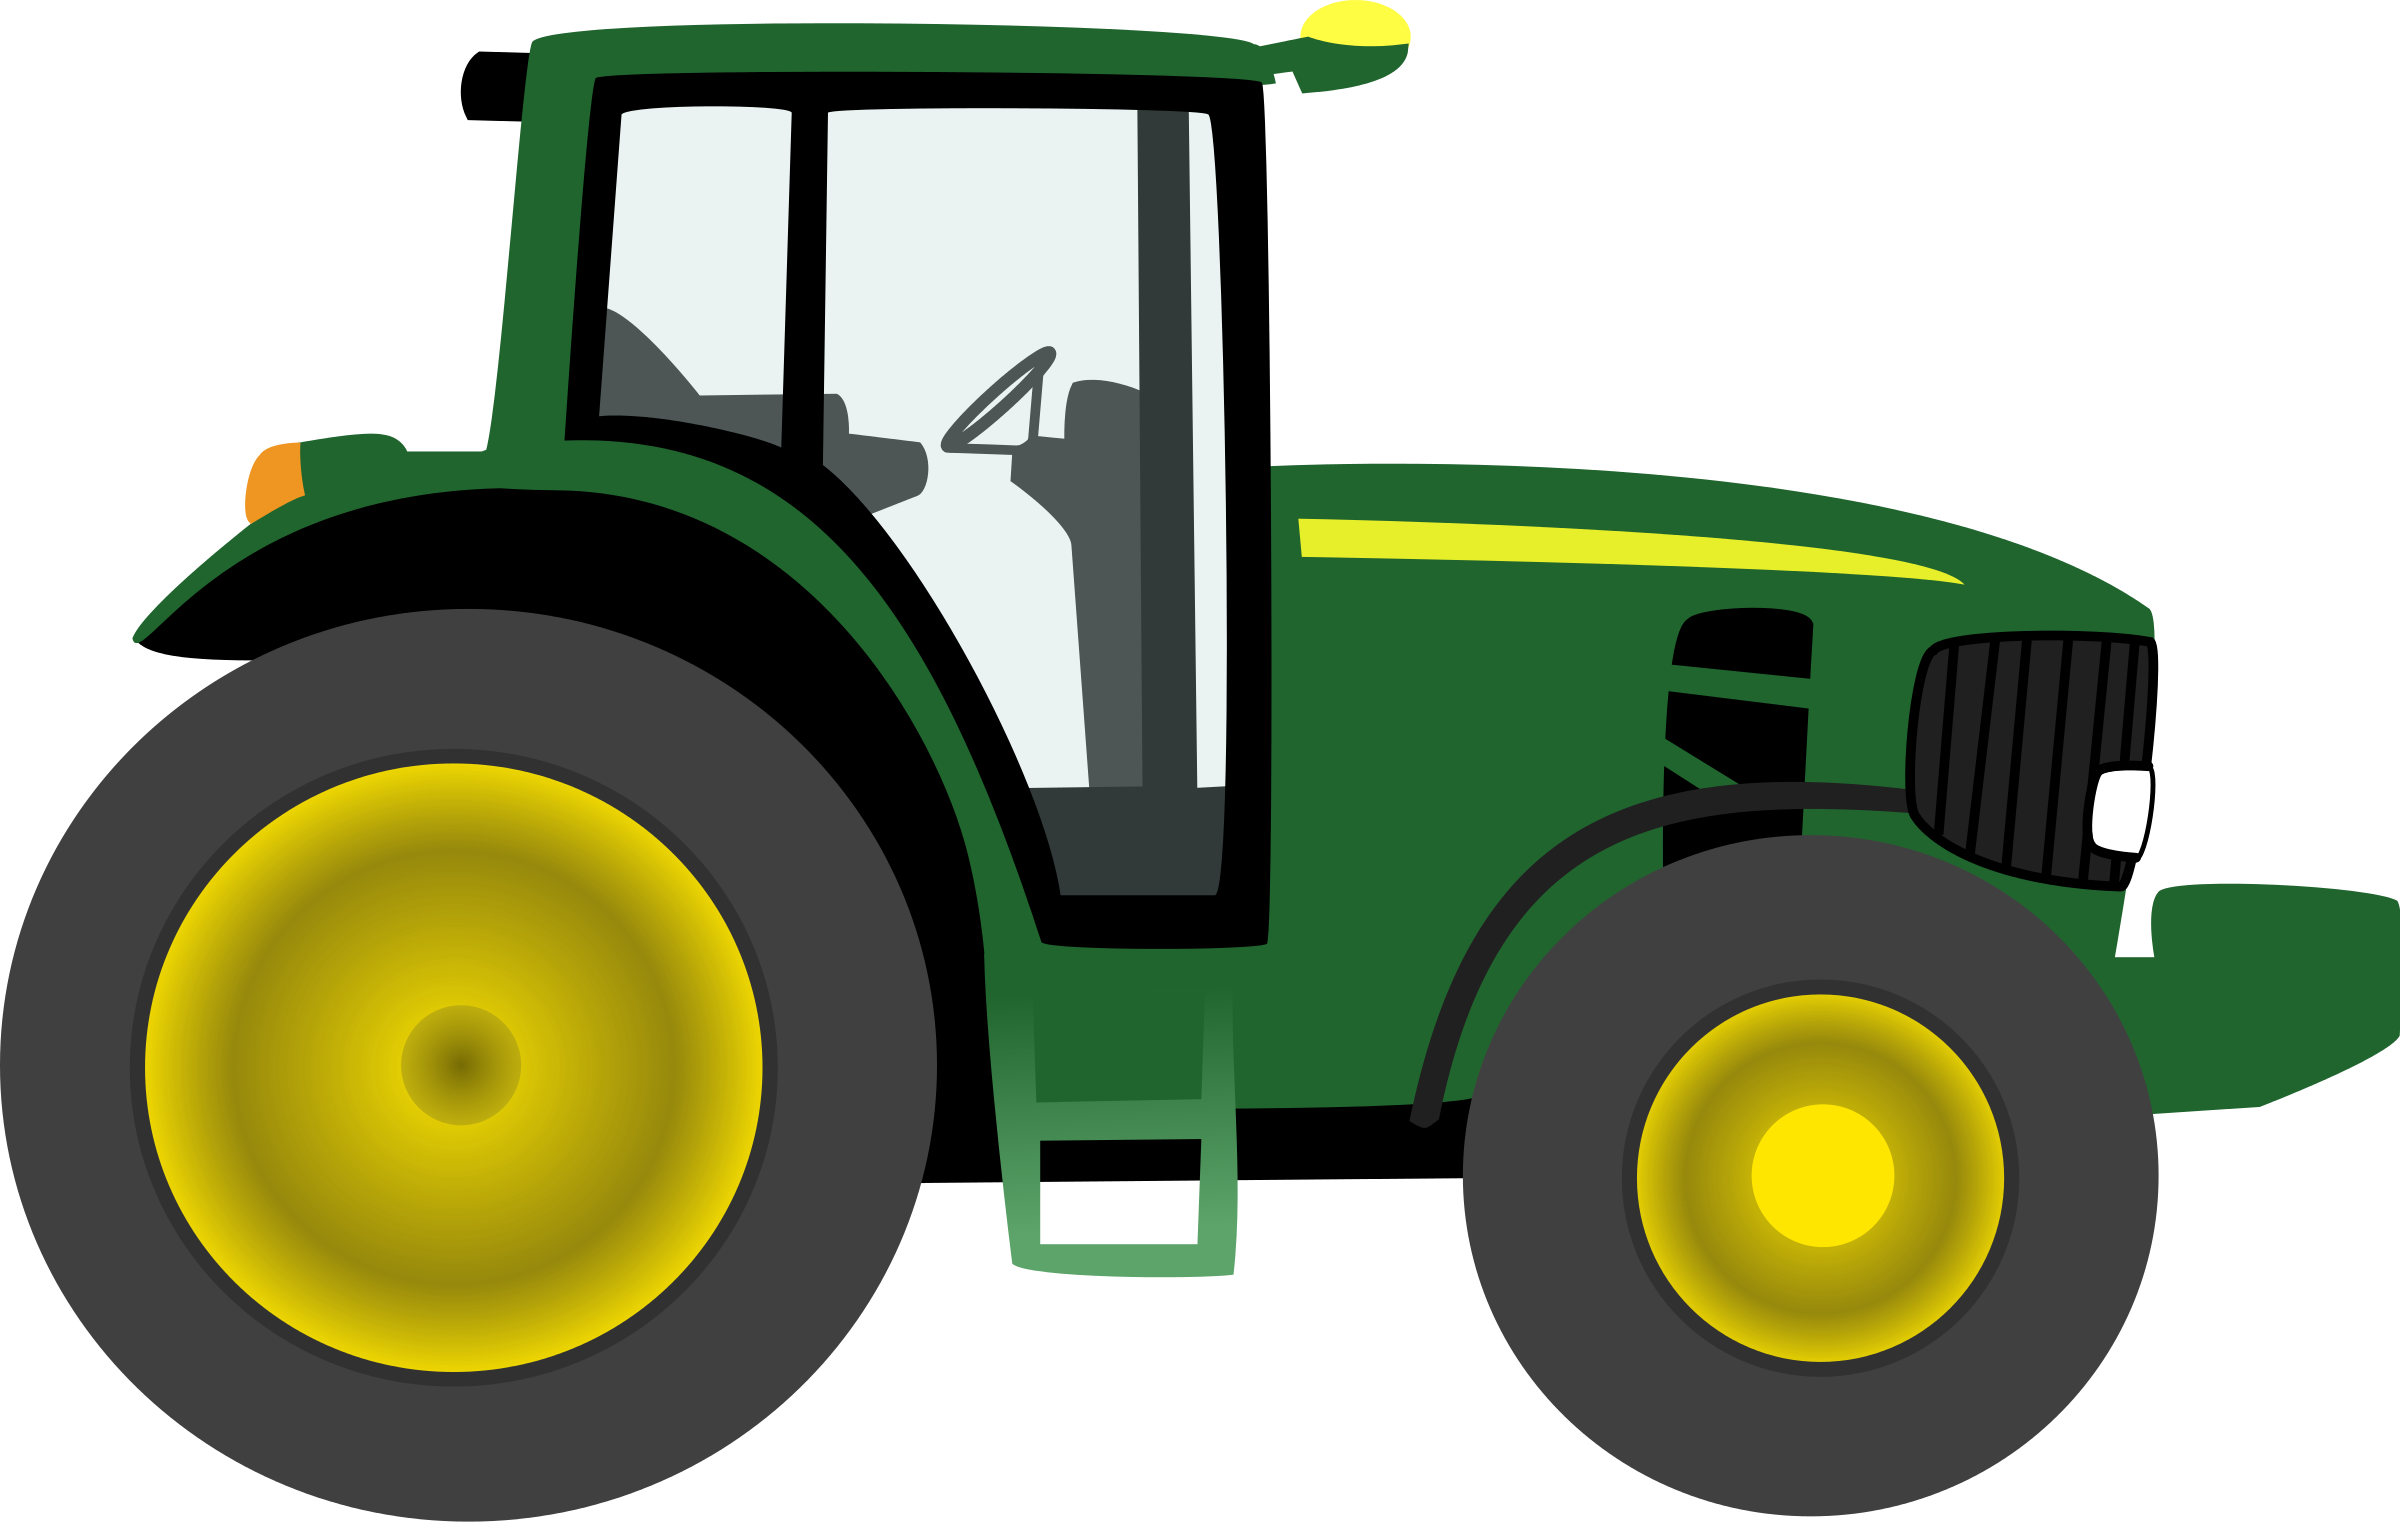 Tractor Clipart Black And White   Clipart Panda   Free Clipart Images